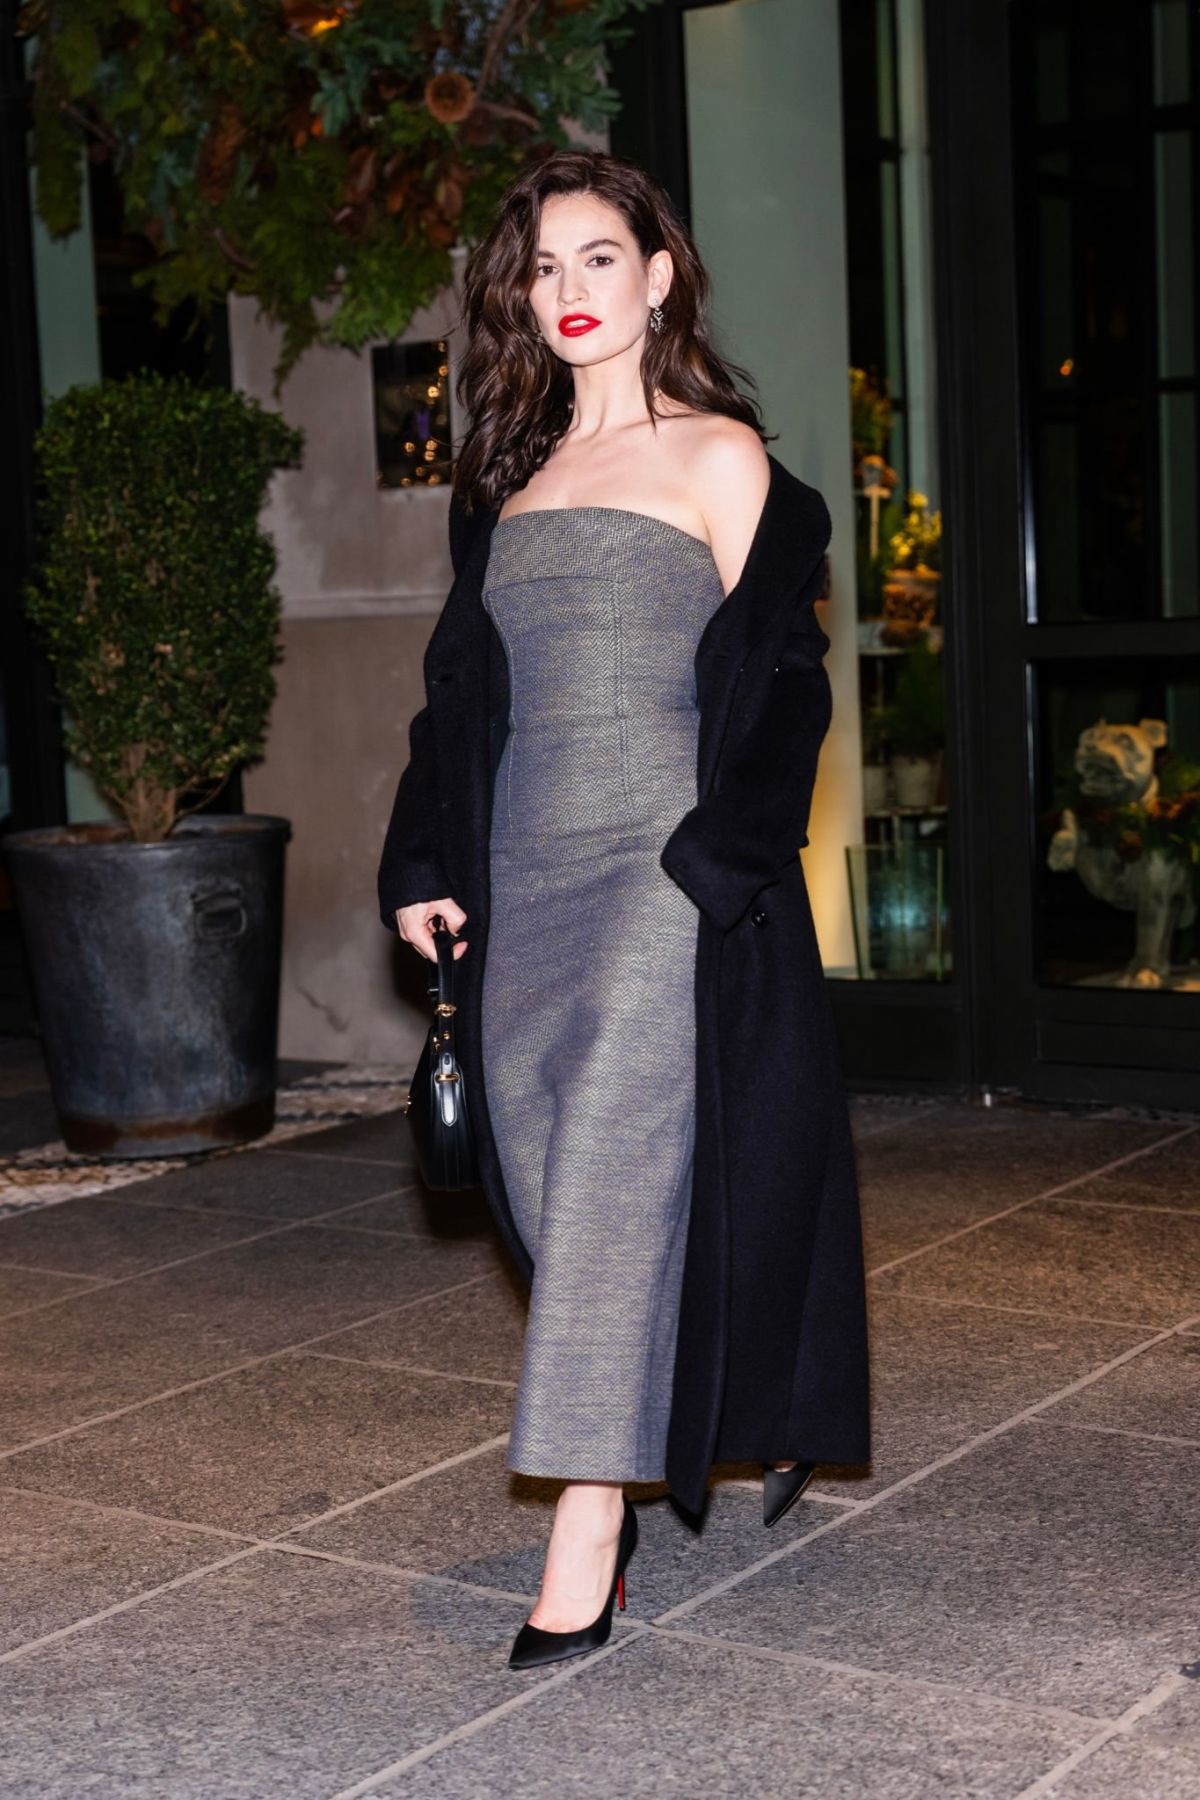 Lily James in Glamorous Night Out Look in New York 4